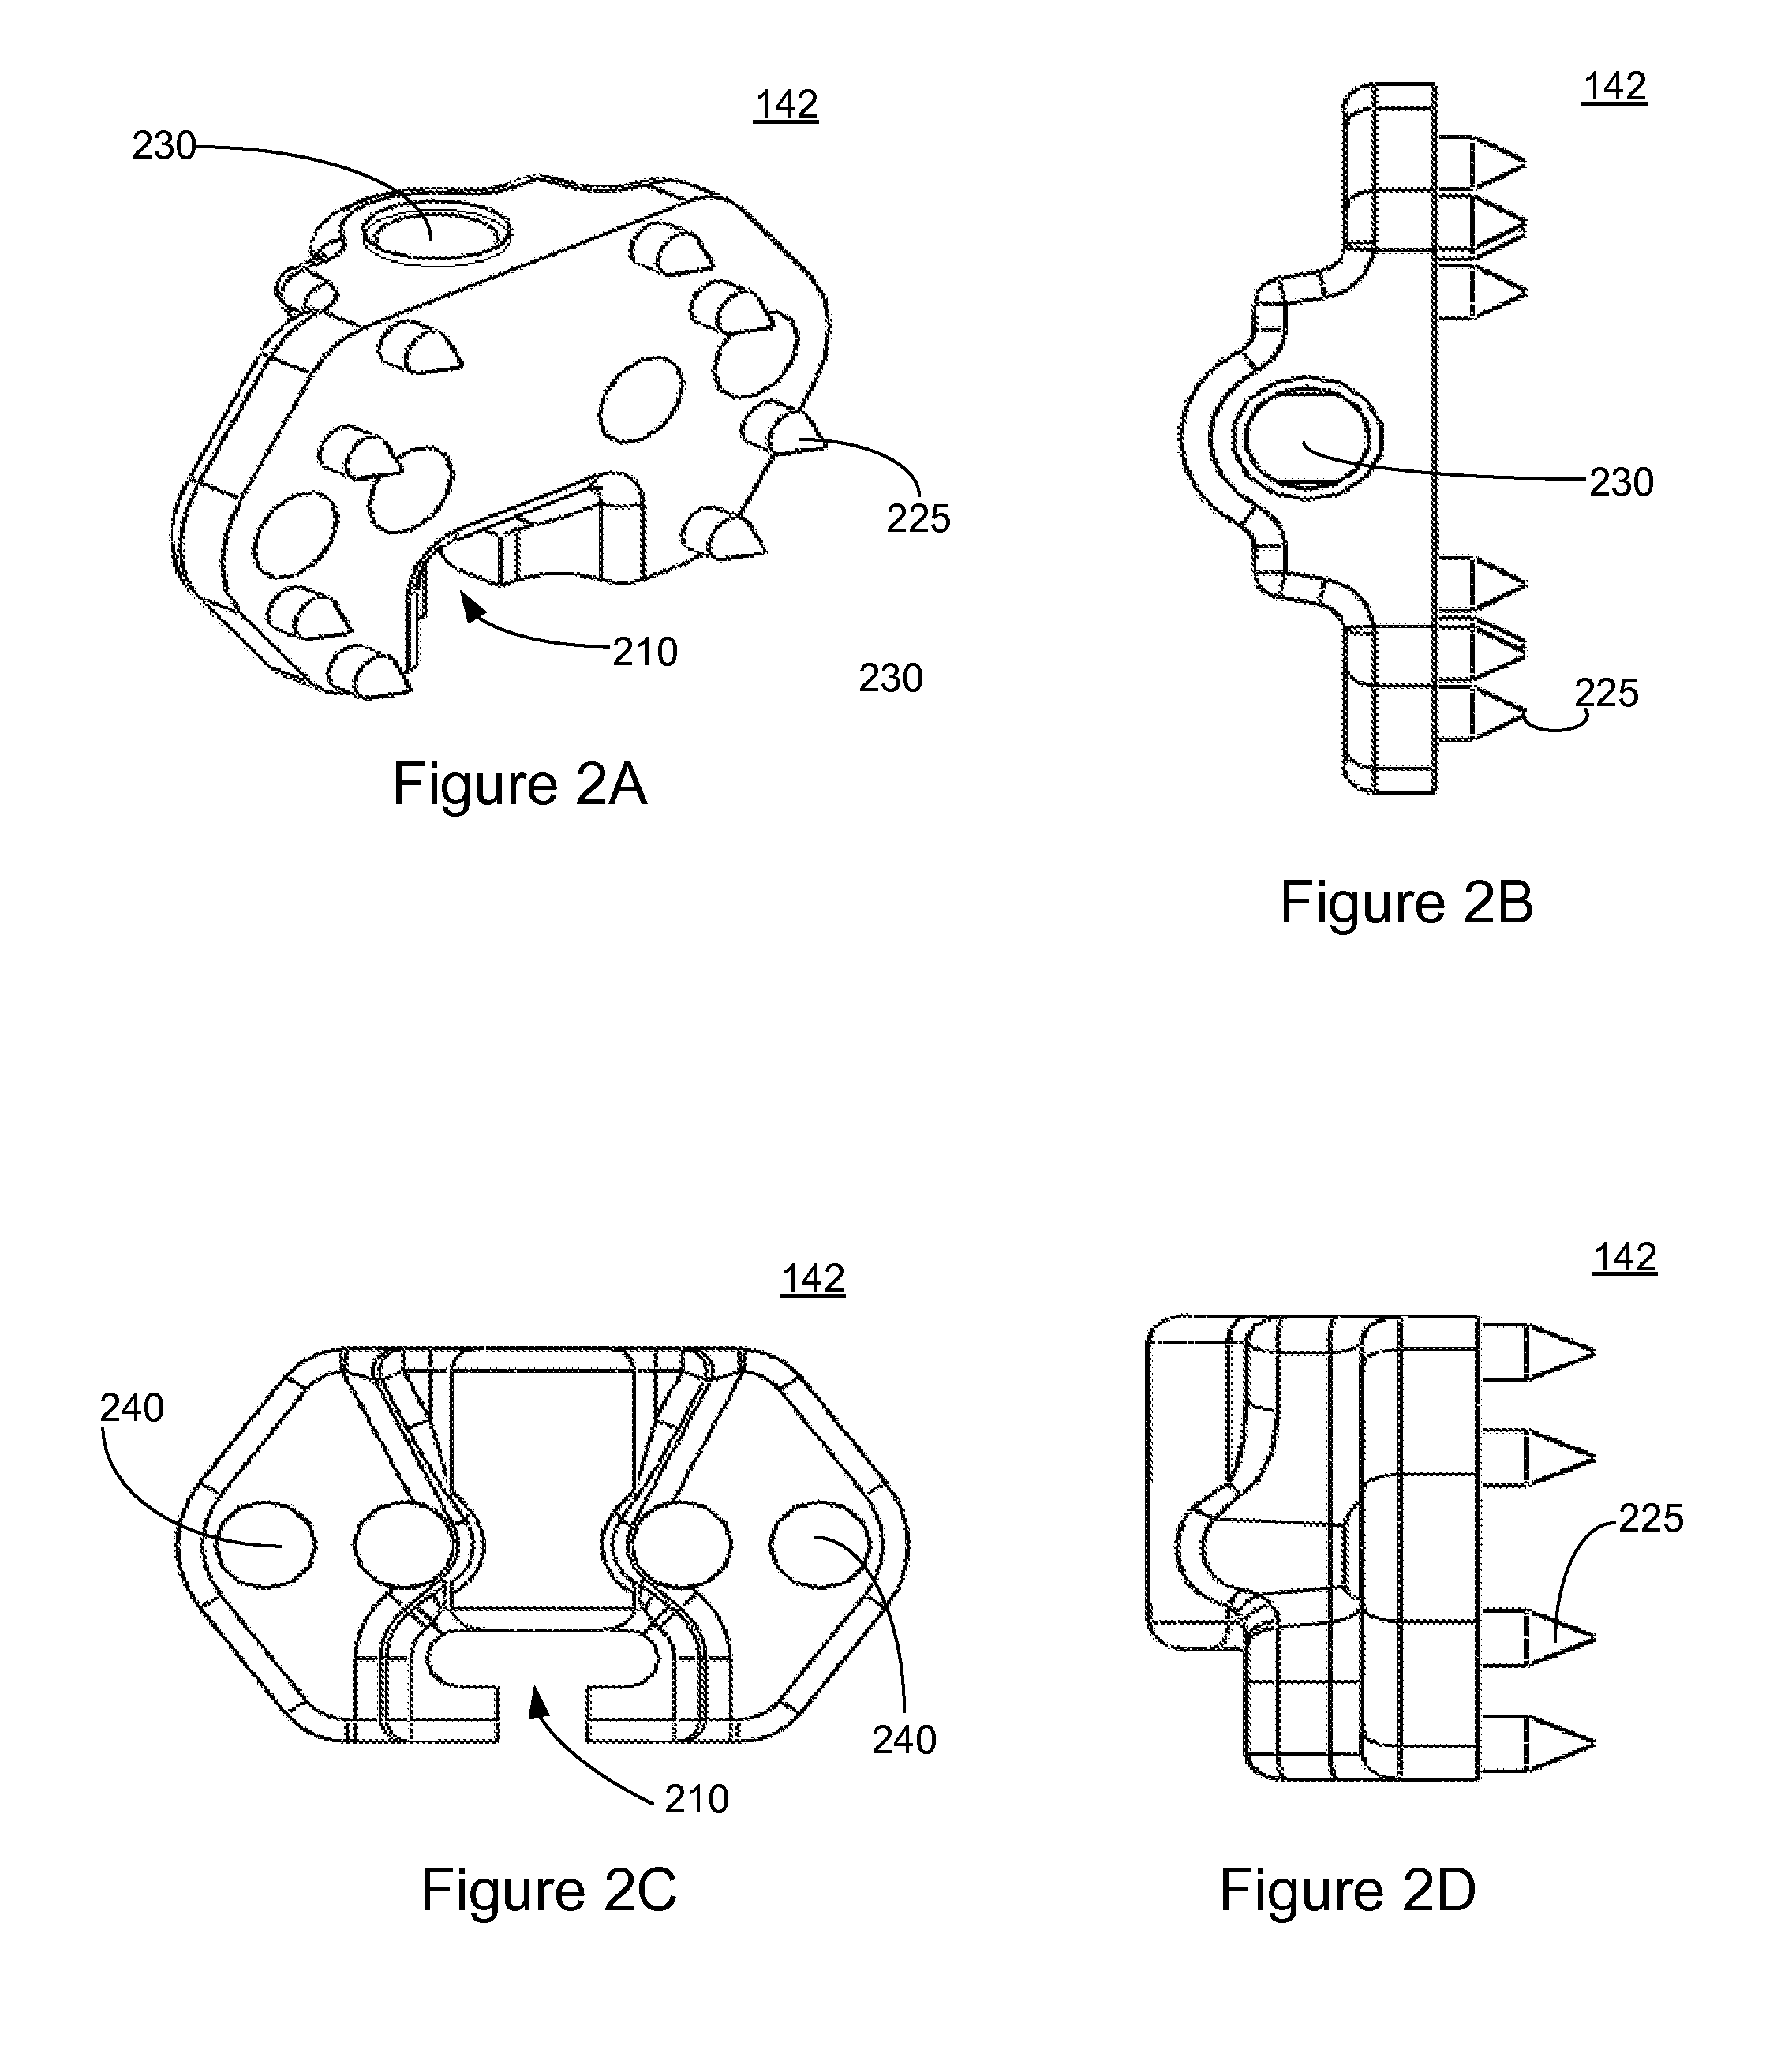 Implantation Tools for Interspinous Process Spacing Device